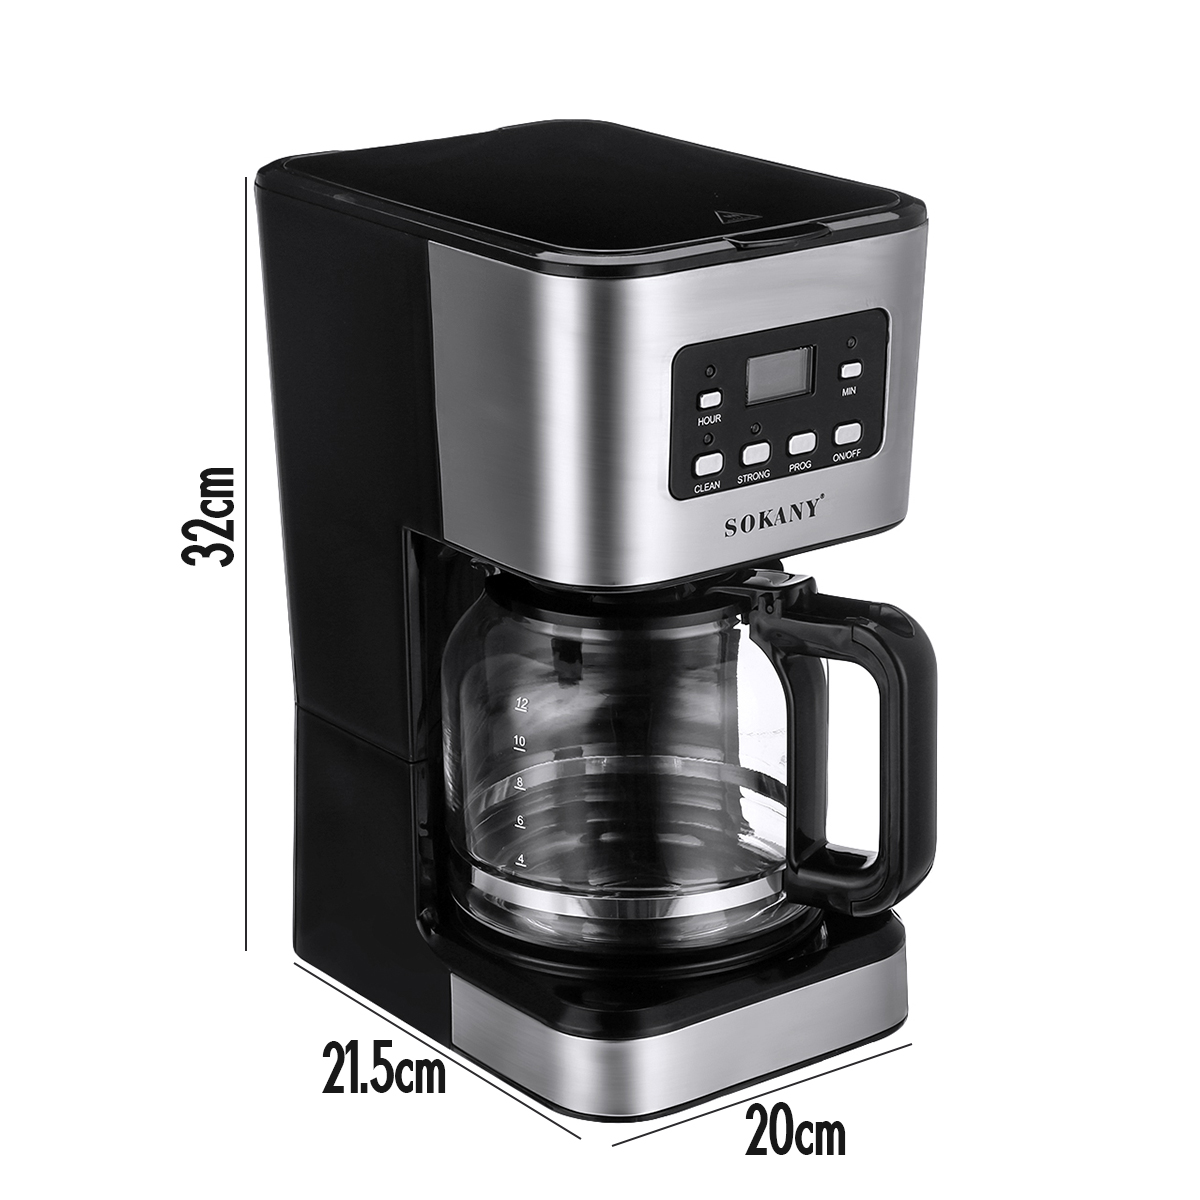 220V Coffee Maker 12 Cups 1.5L Semi-Automatic Espresso Making Machine Stainless Steel 9